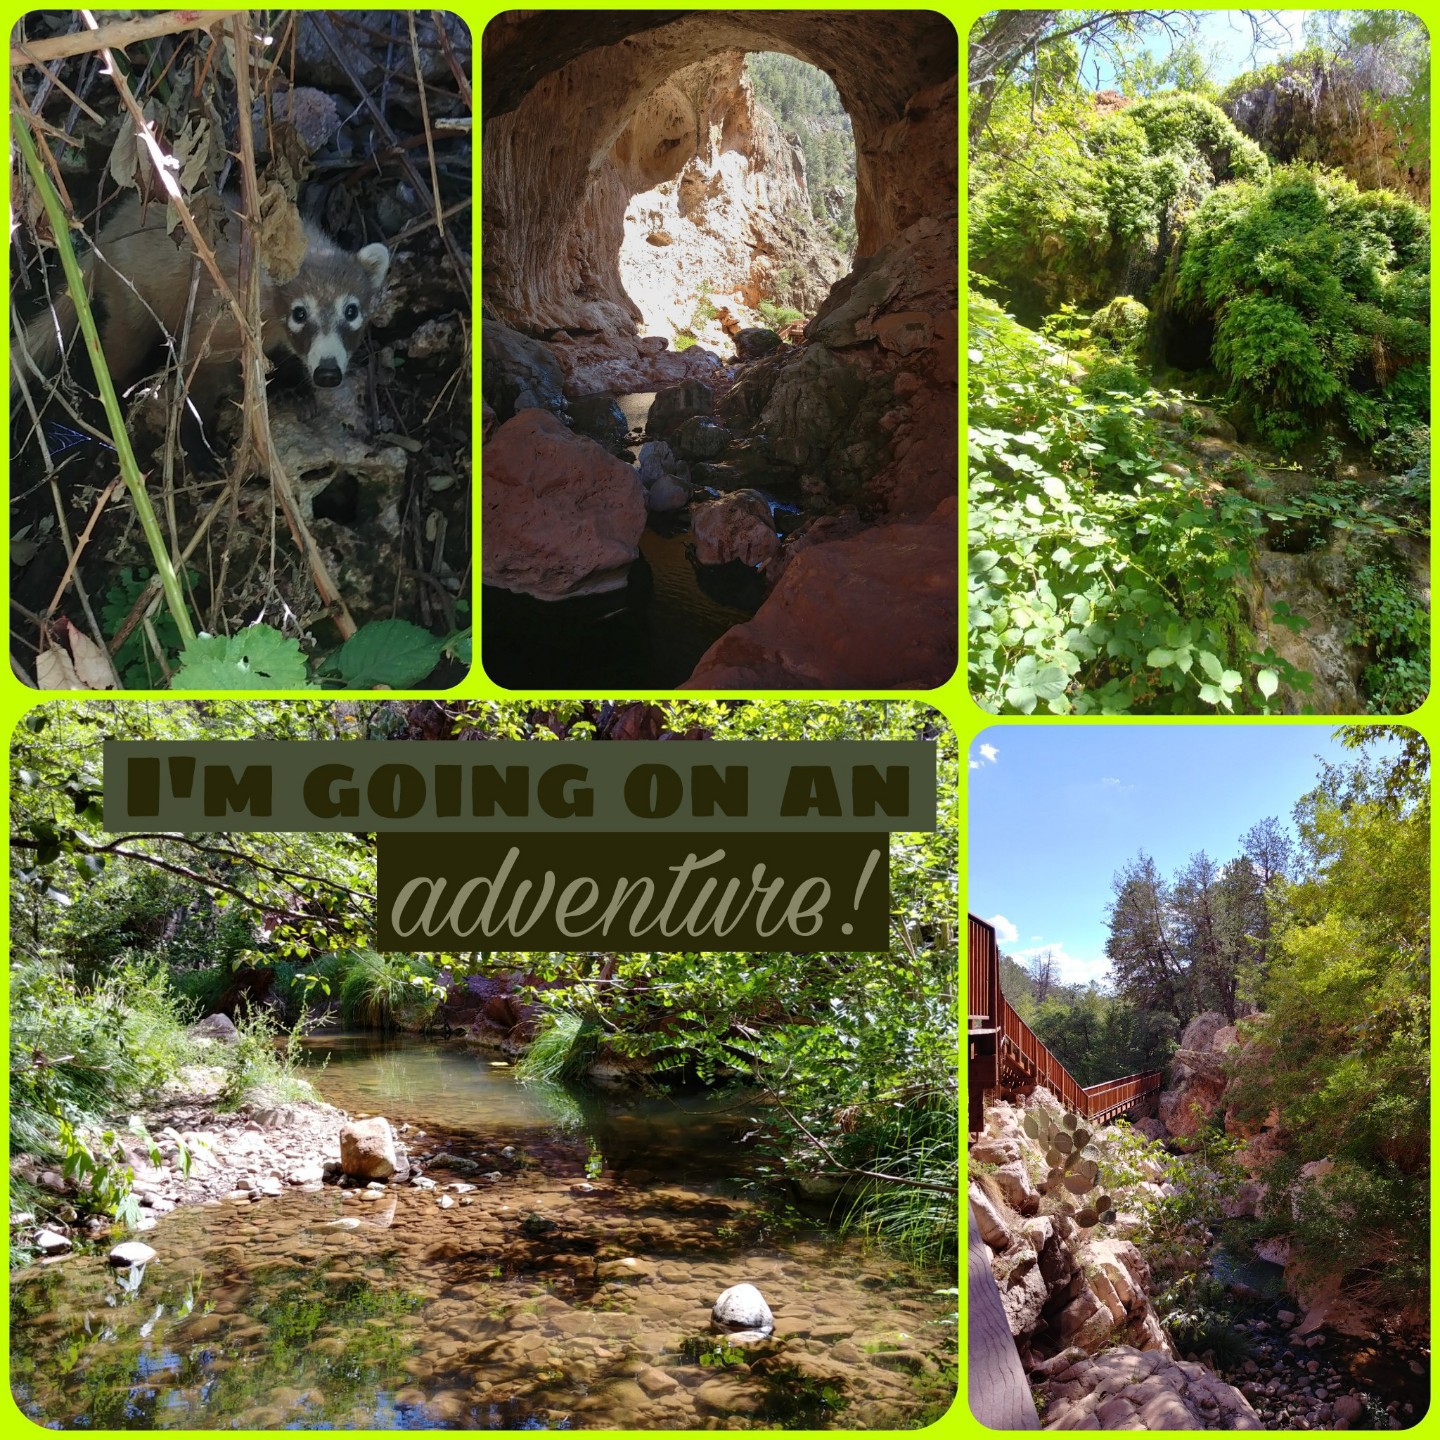 My adventure today at a natural park!